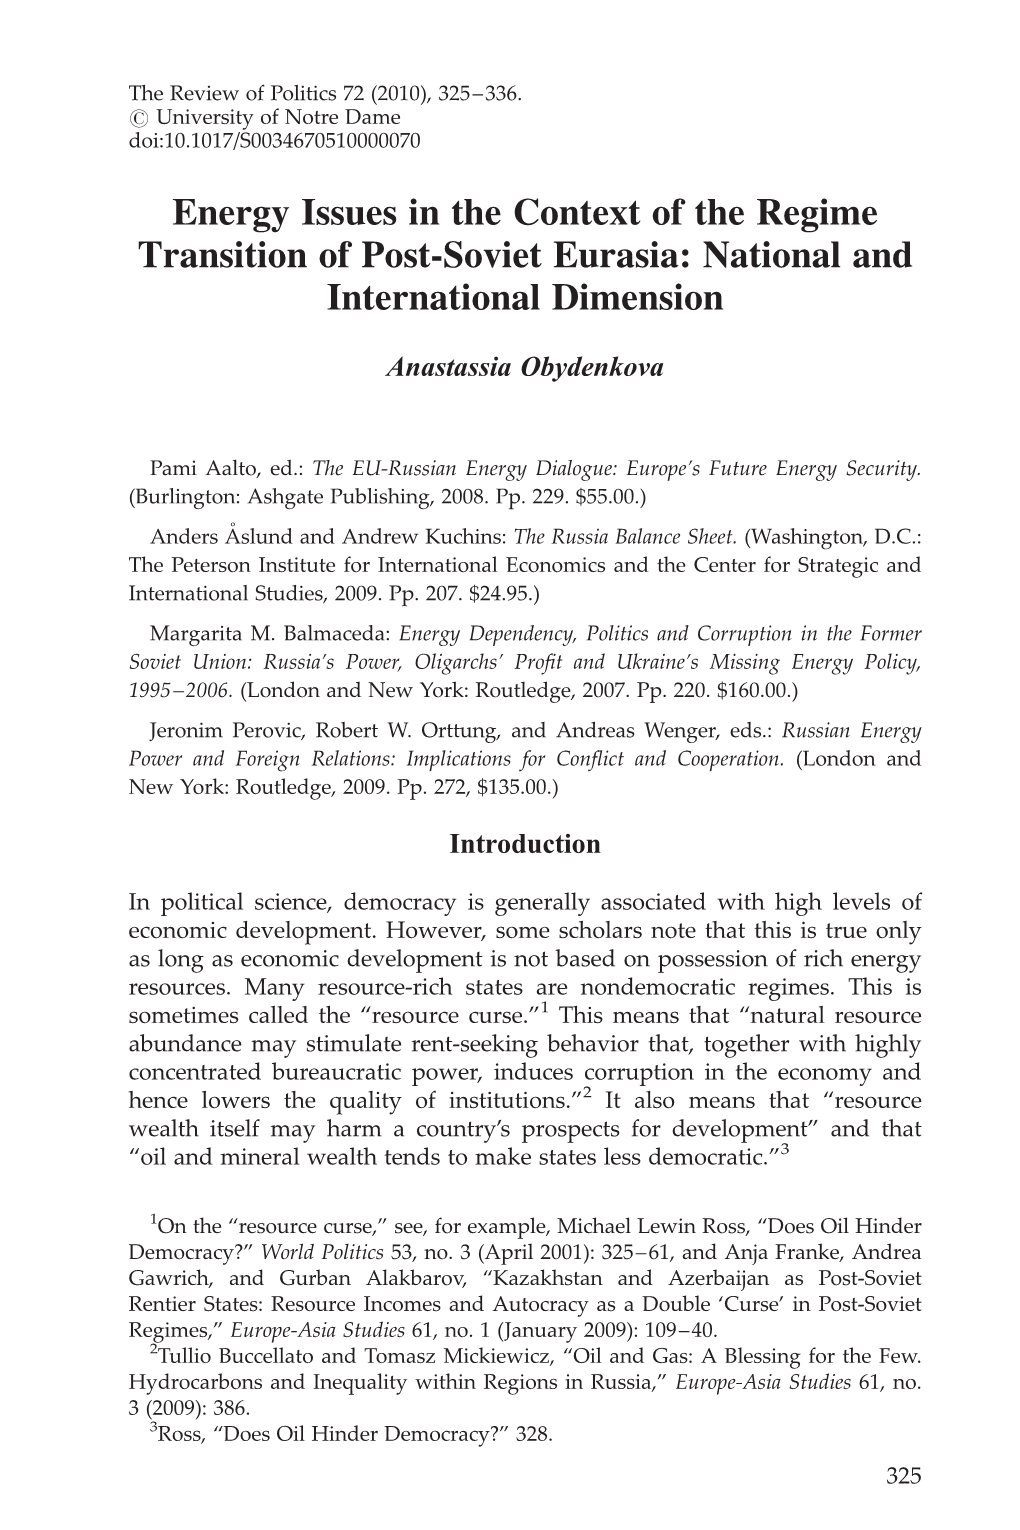 Energy Issues in the Context of the Regime Transition of Post-Soviet Eurasia: National and International Dimension